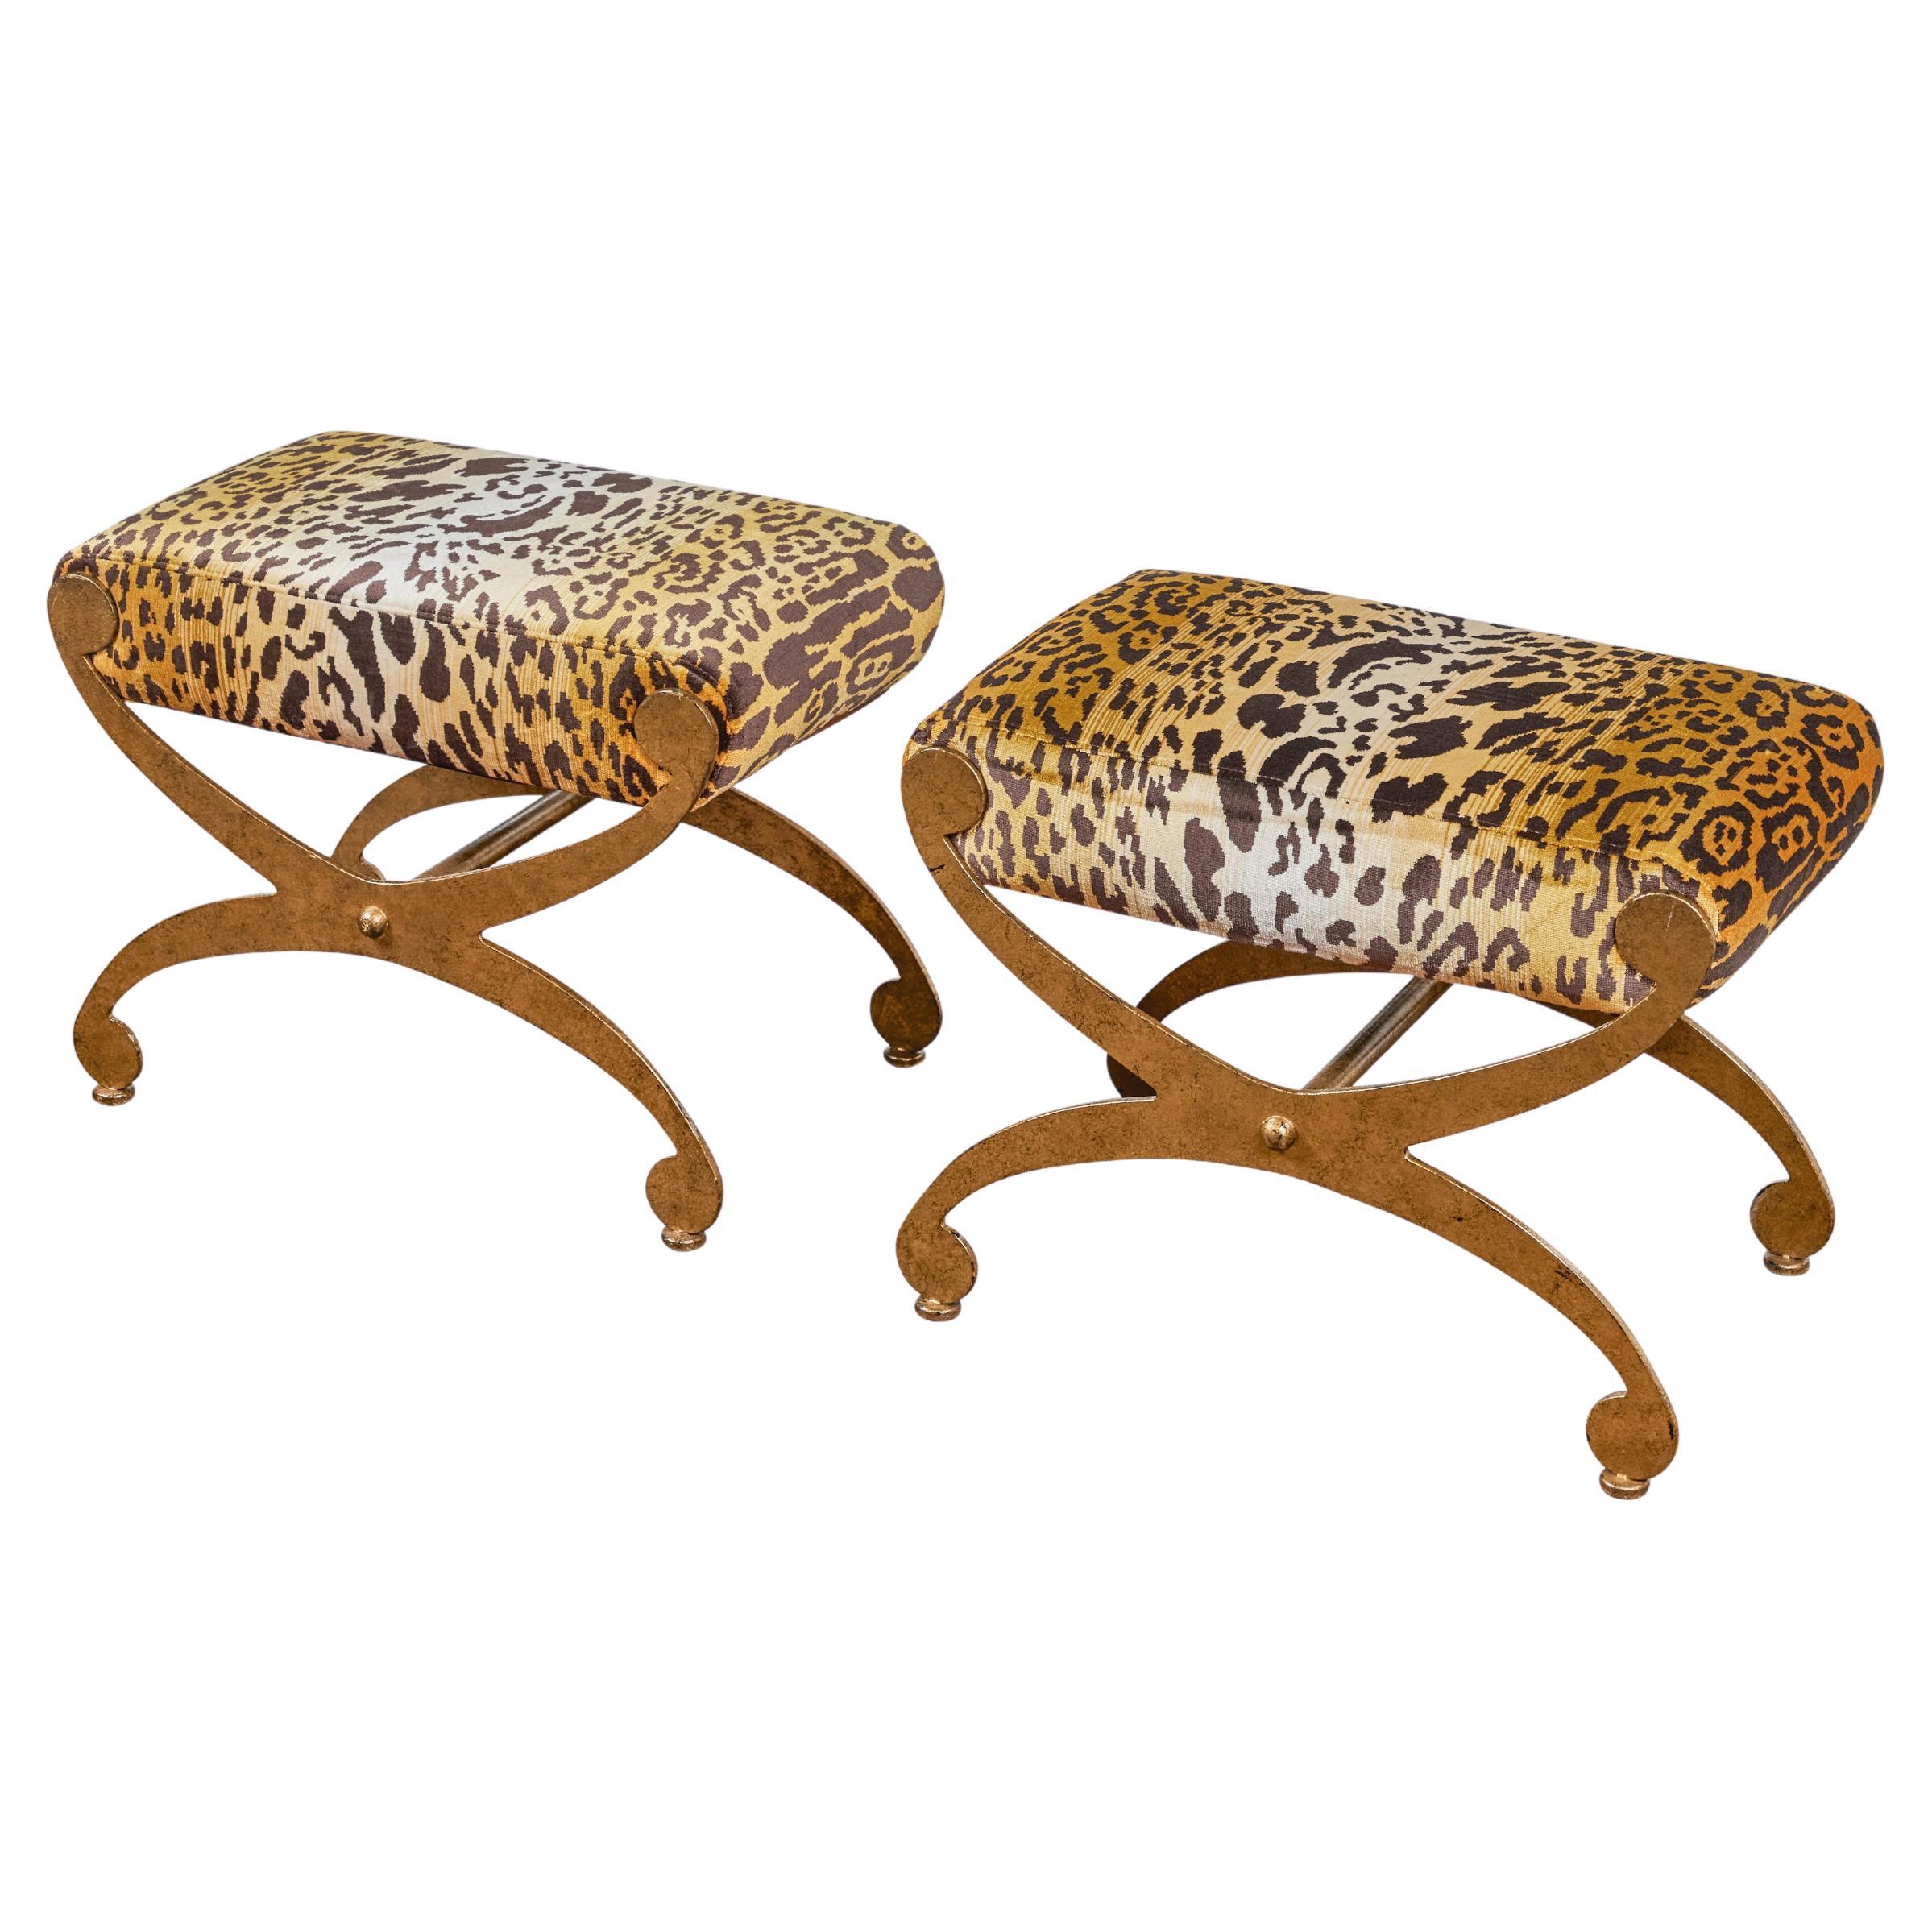 Wonderful and versatile pair of gilt metal benches newly re-upholstered in a spectacular leopard fabric by Nobilis France.  These benches are well made and very heavy.  they would be incredibly chic in an entry, flanking a console table or floating